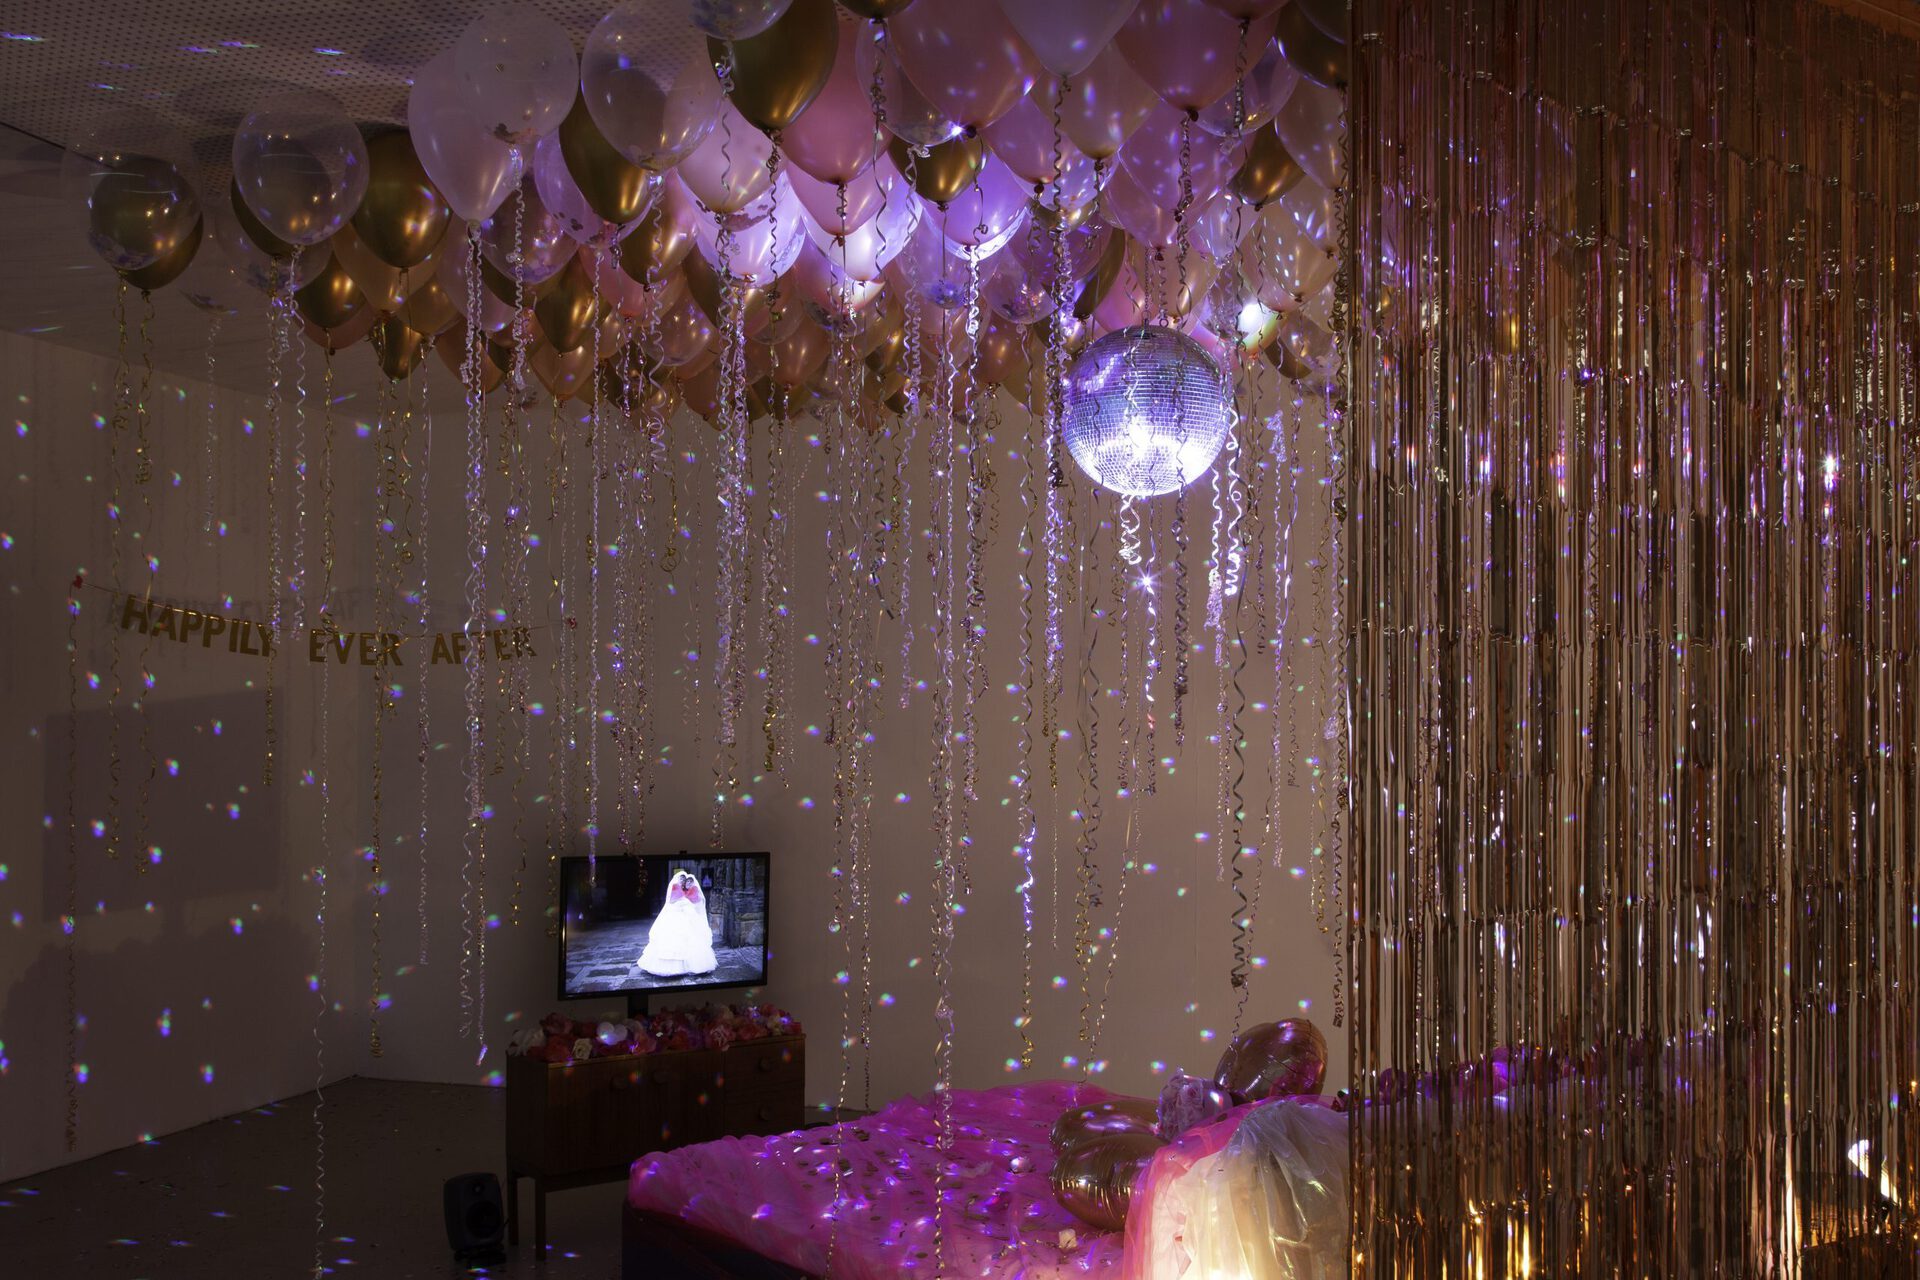 Katarzyna Perlak, Happily Ever After, 2019, video and installation, 19:44 min, mixed materials. Photo: Jens Franke.